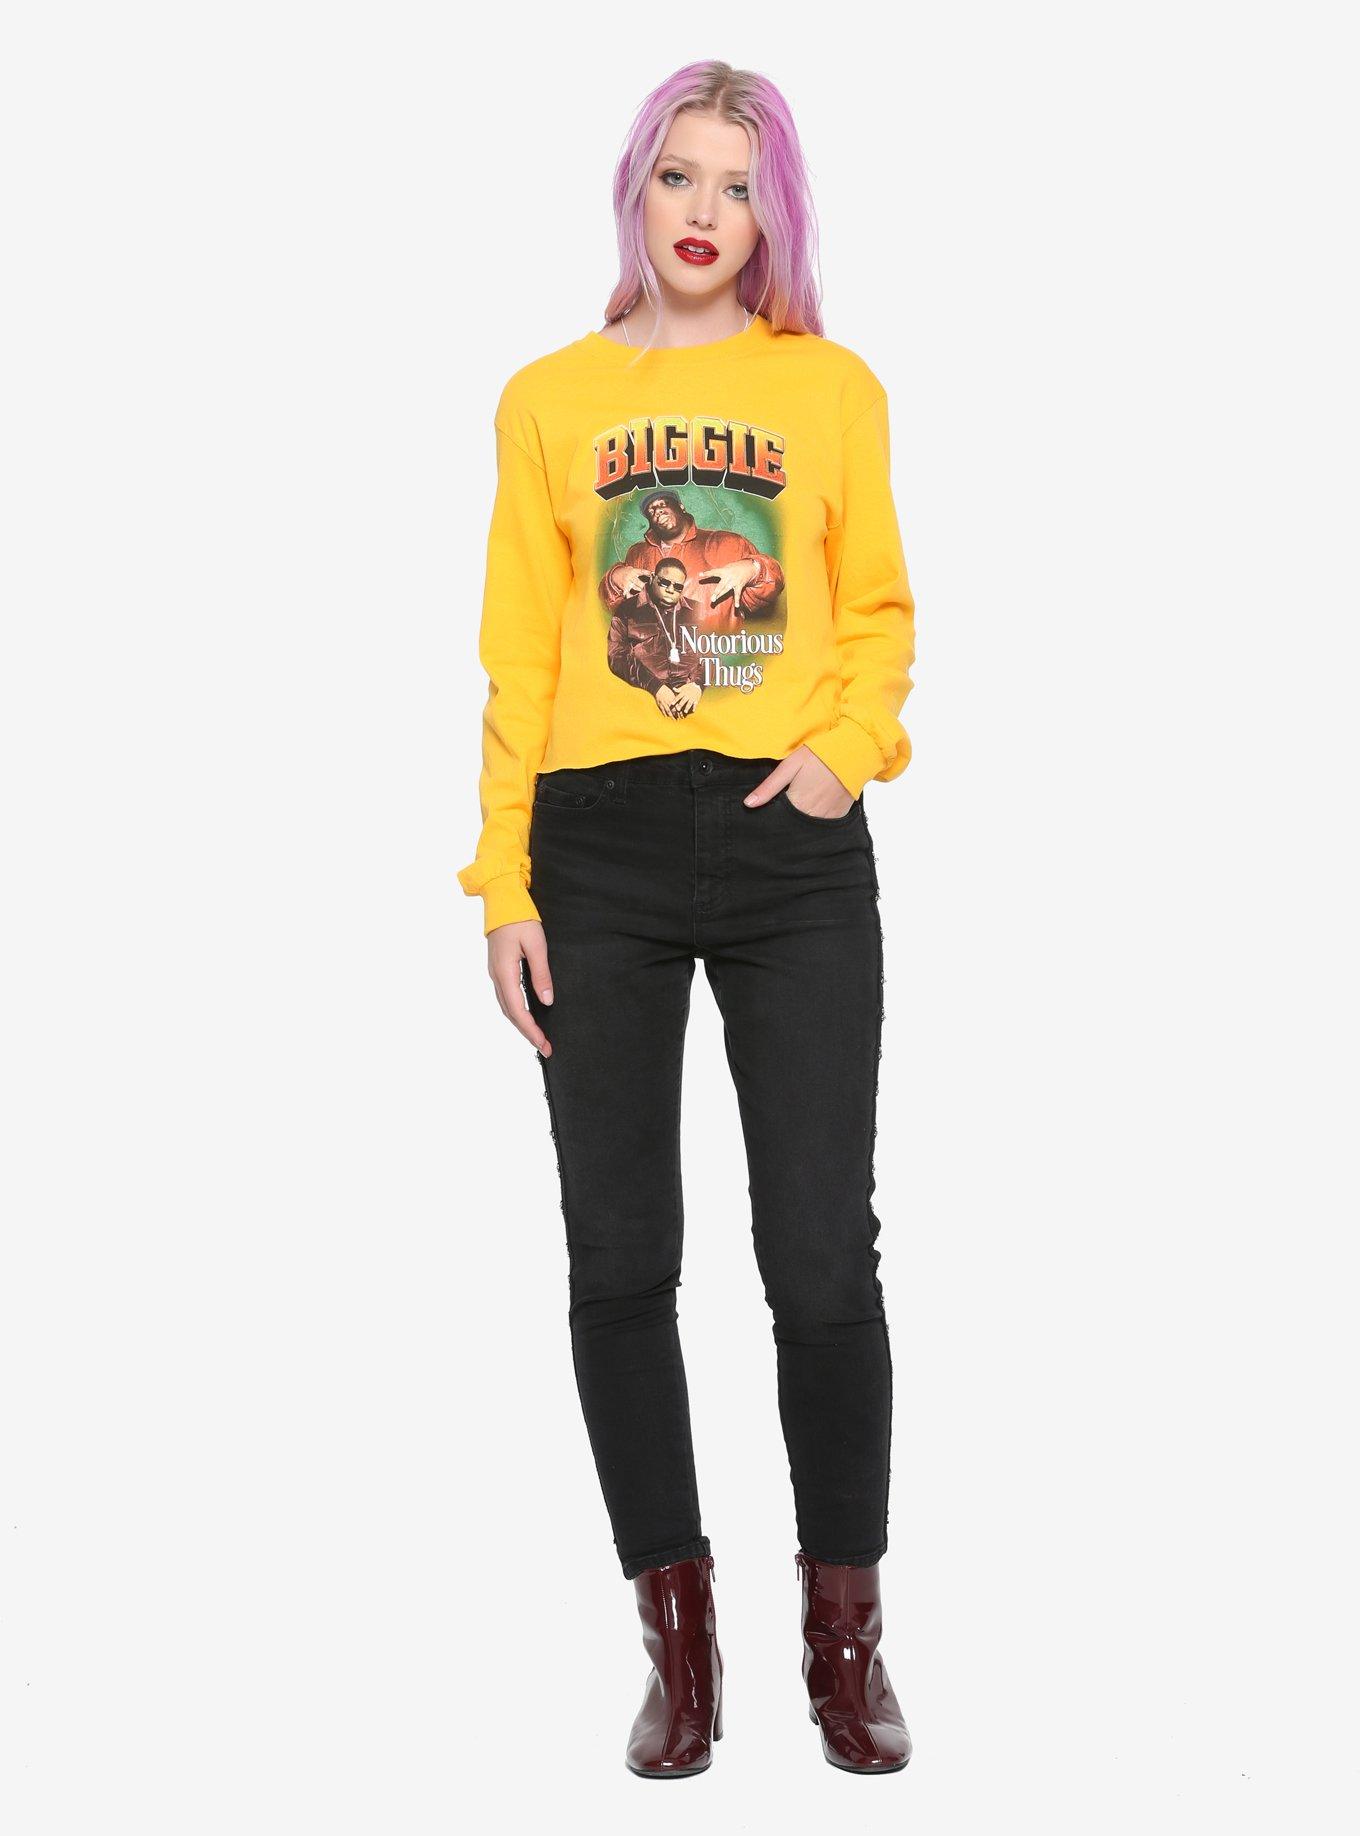 Notorious B.I.G. Ready To Die Tour Cropped Long-Sleeve Girls T-Shirt, YELLOW, alternate